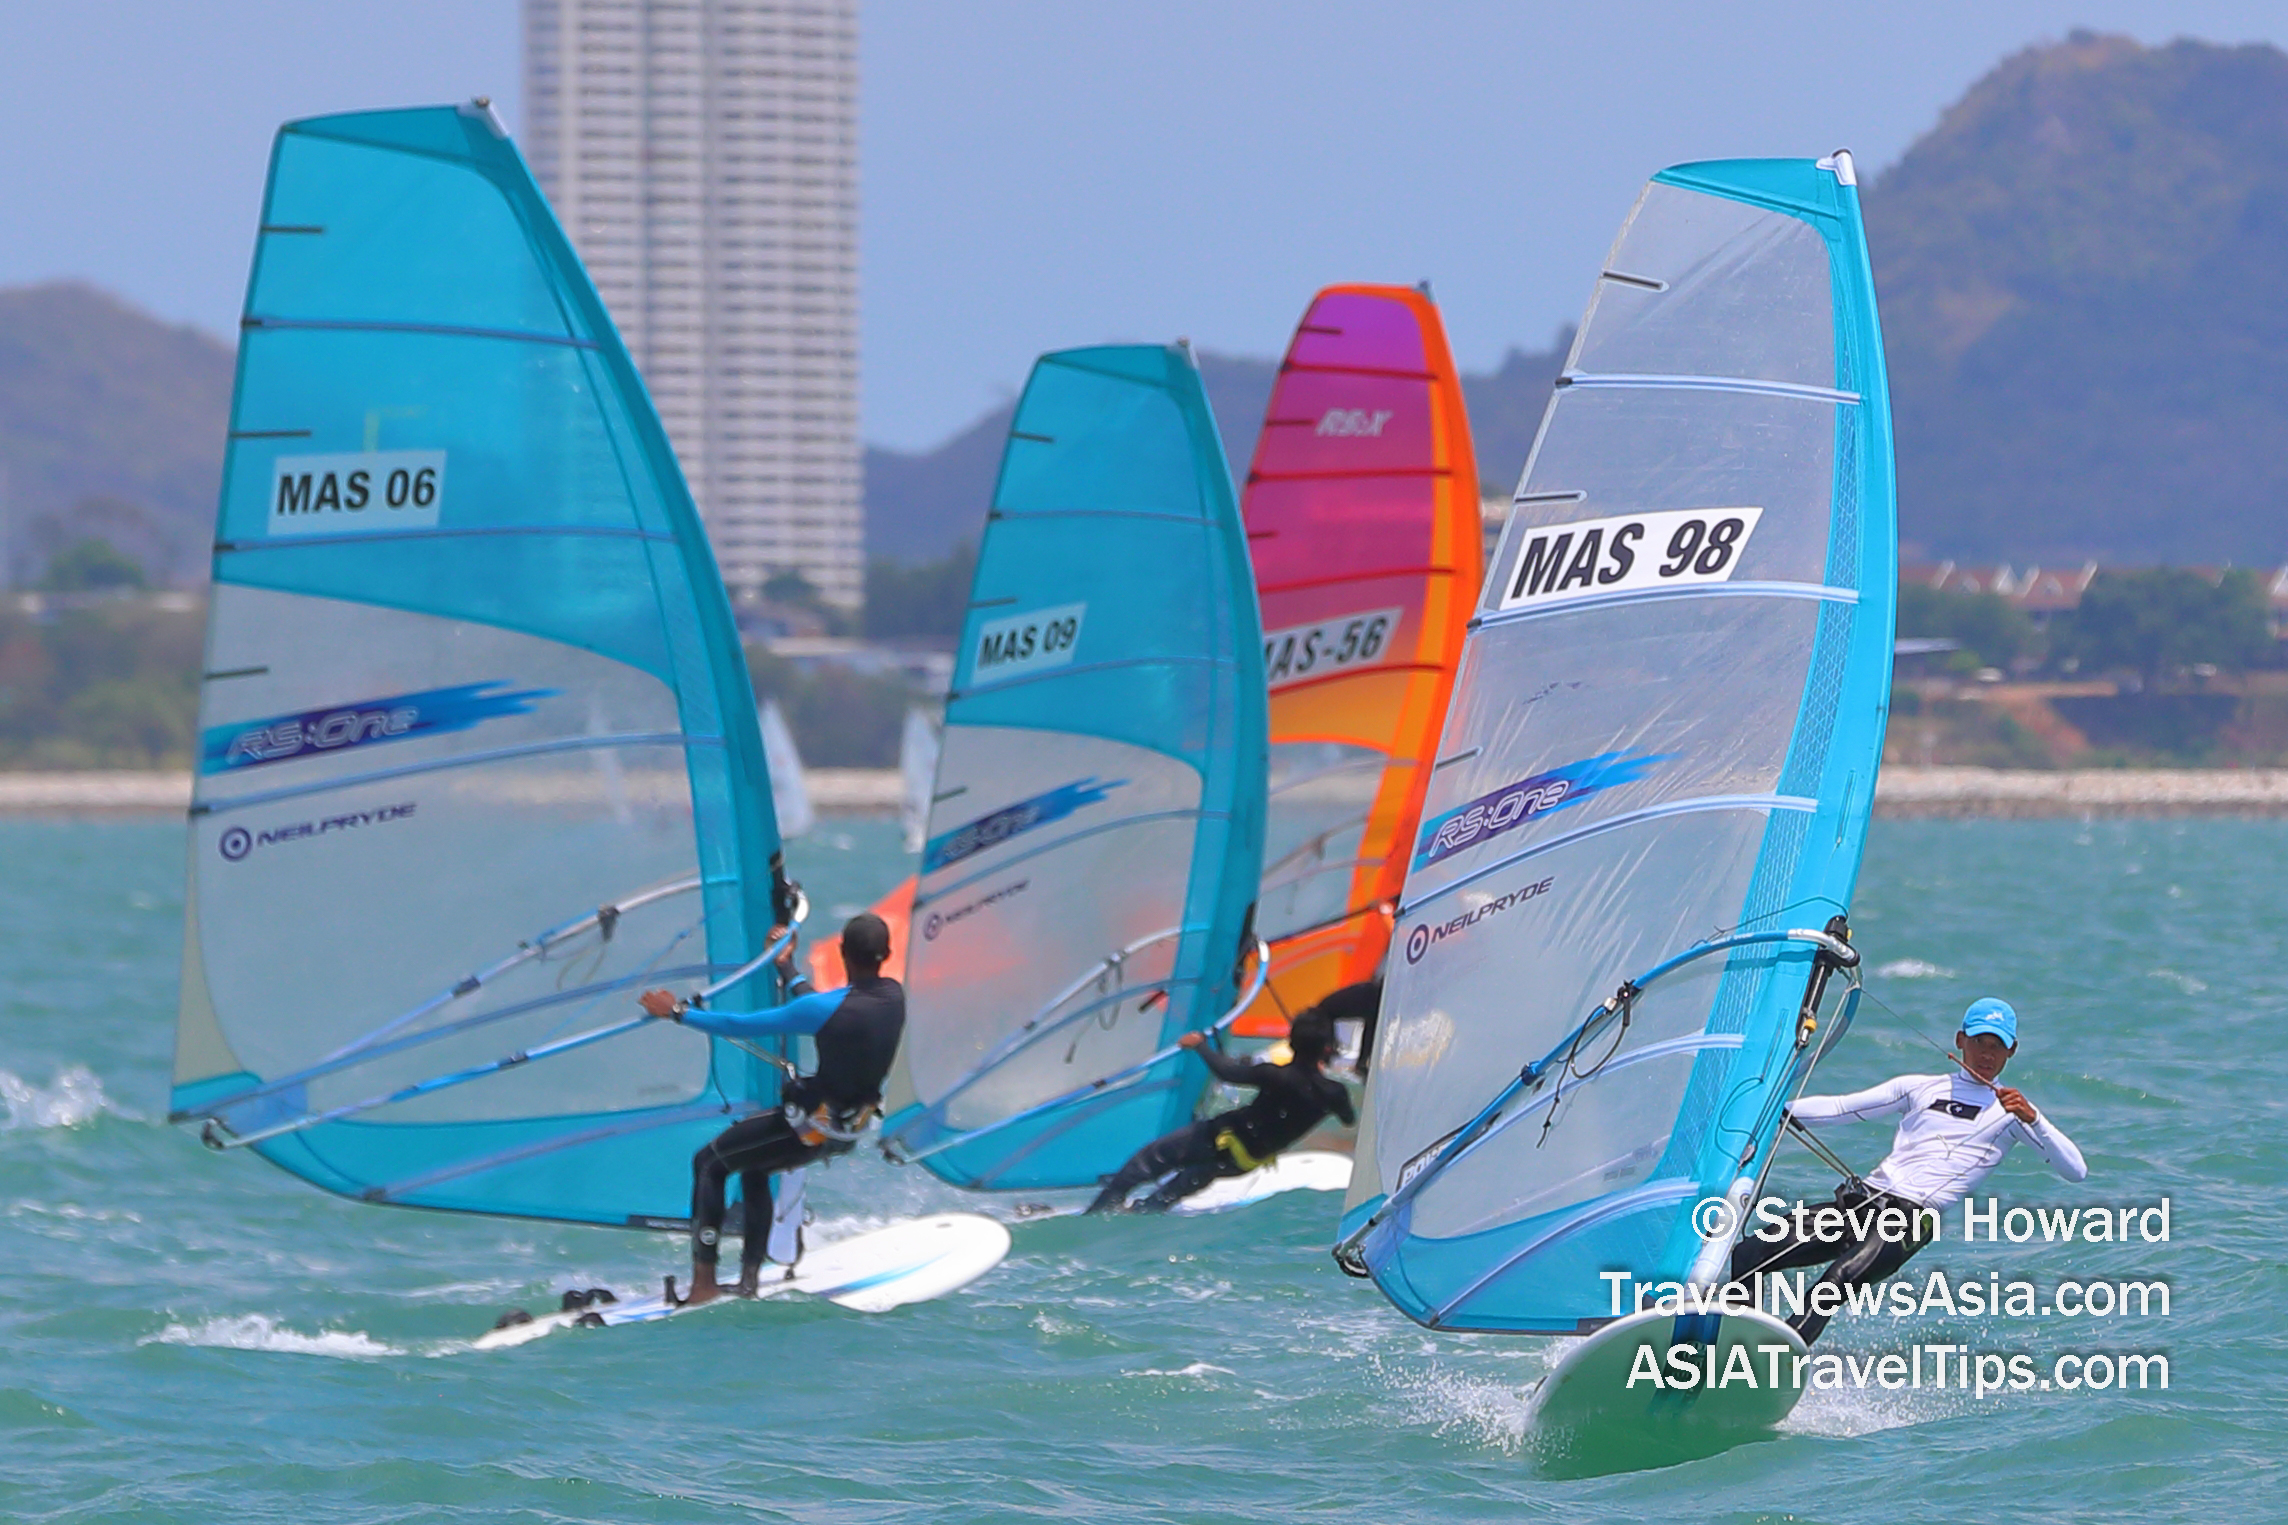 Ilham Bin Wahab (right, sail MAS98) from Malaysia won the Windsurfing RS One Class competition at Top of the Gulf Regatta 2019 in Pattaya, Thailand. Picture by Steven Howard of TravelNewsAsia.com Click to enlarge.